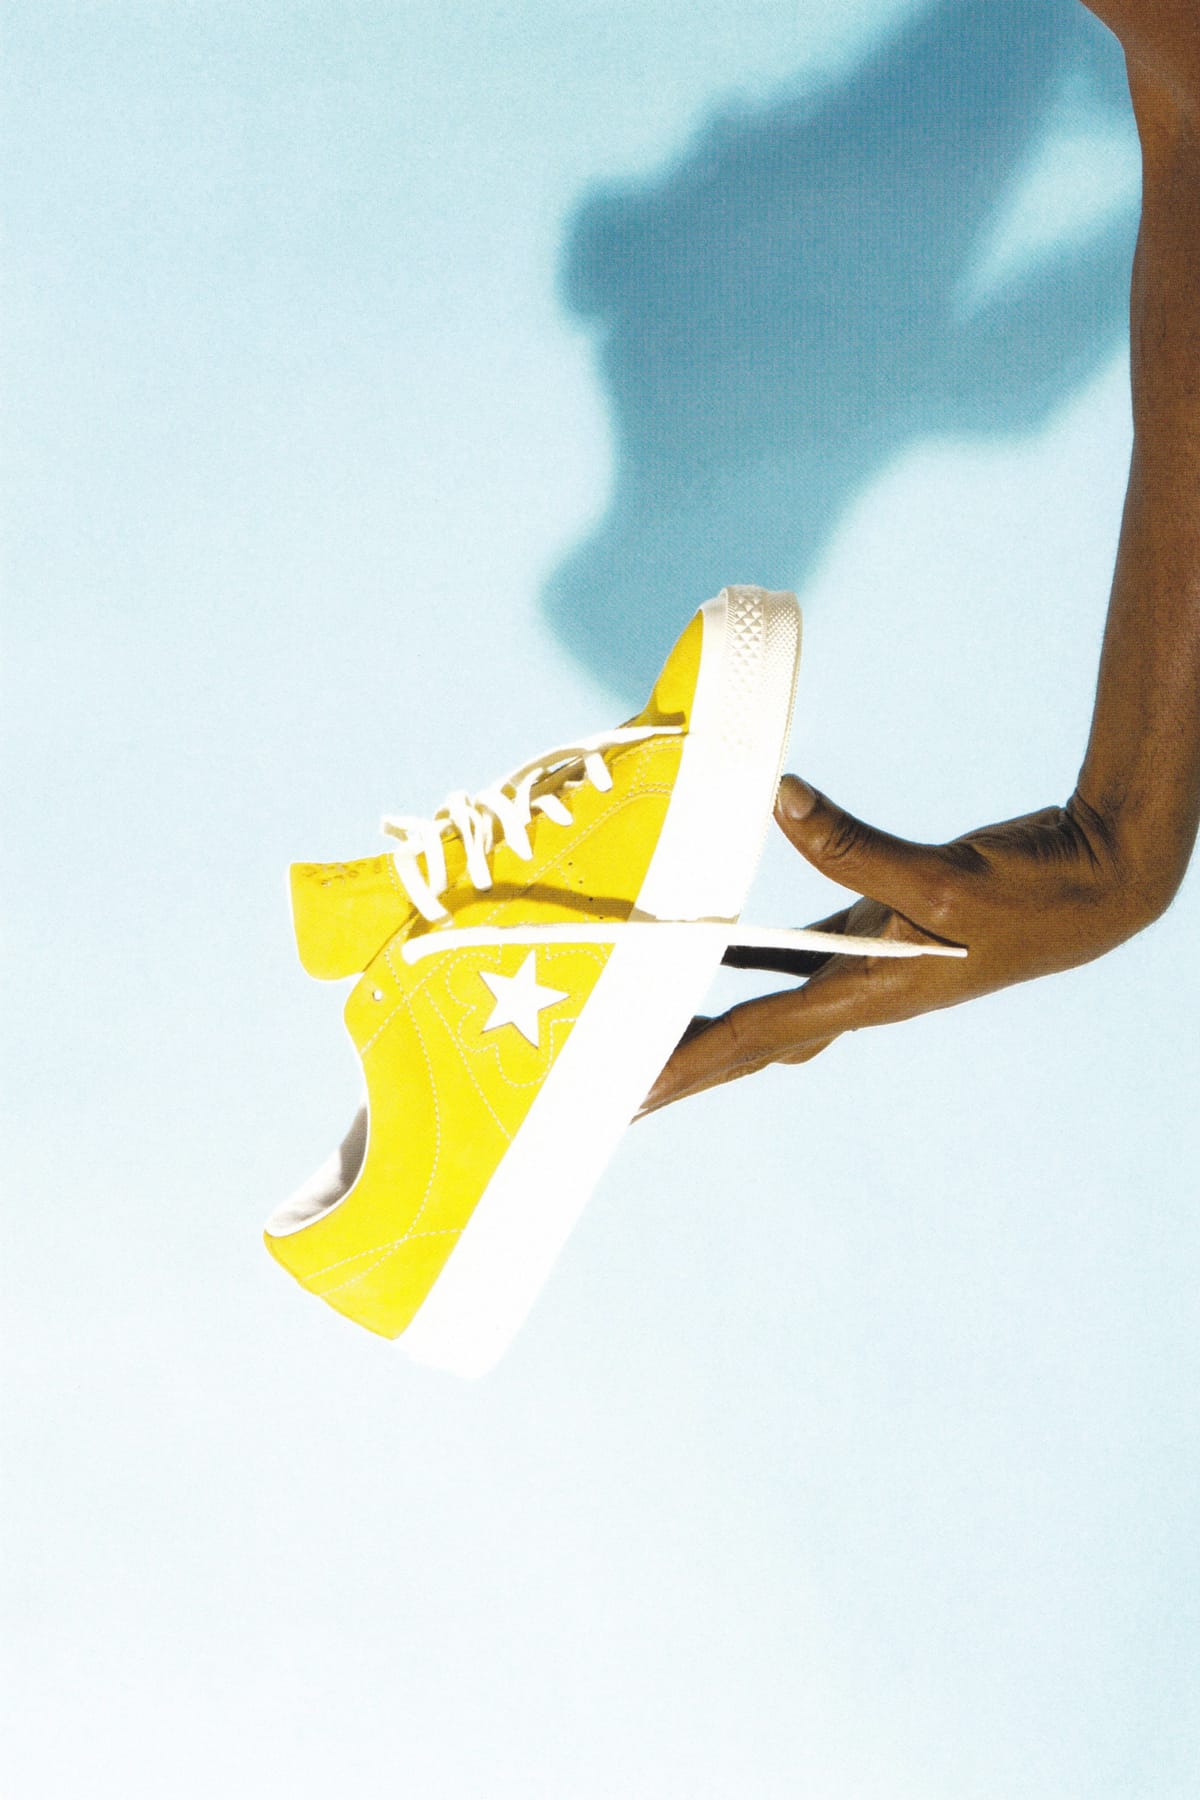 tyler the creator bee shoes